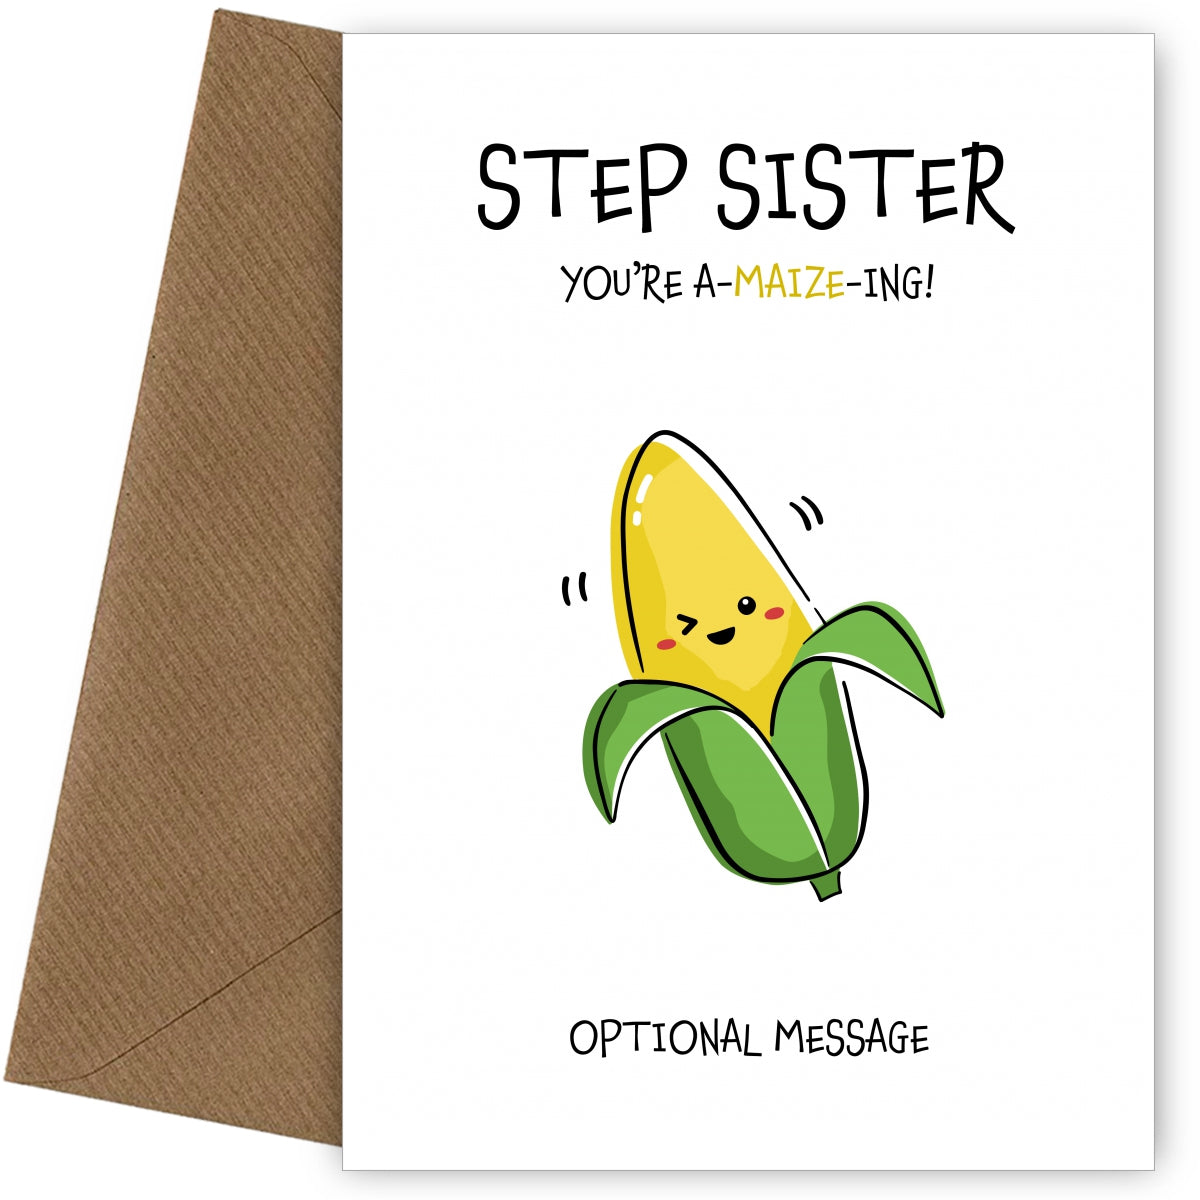 Amazing Birthday Card for Step Sister - You're A-Maize-ing